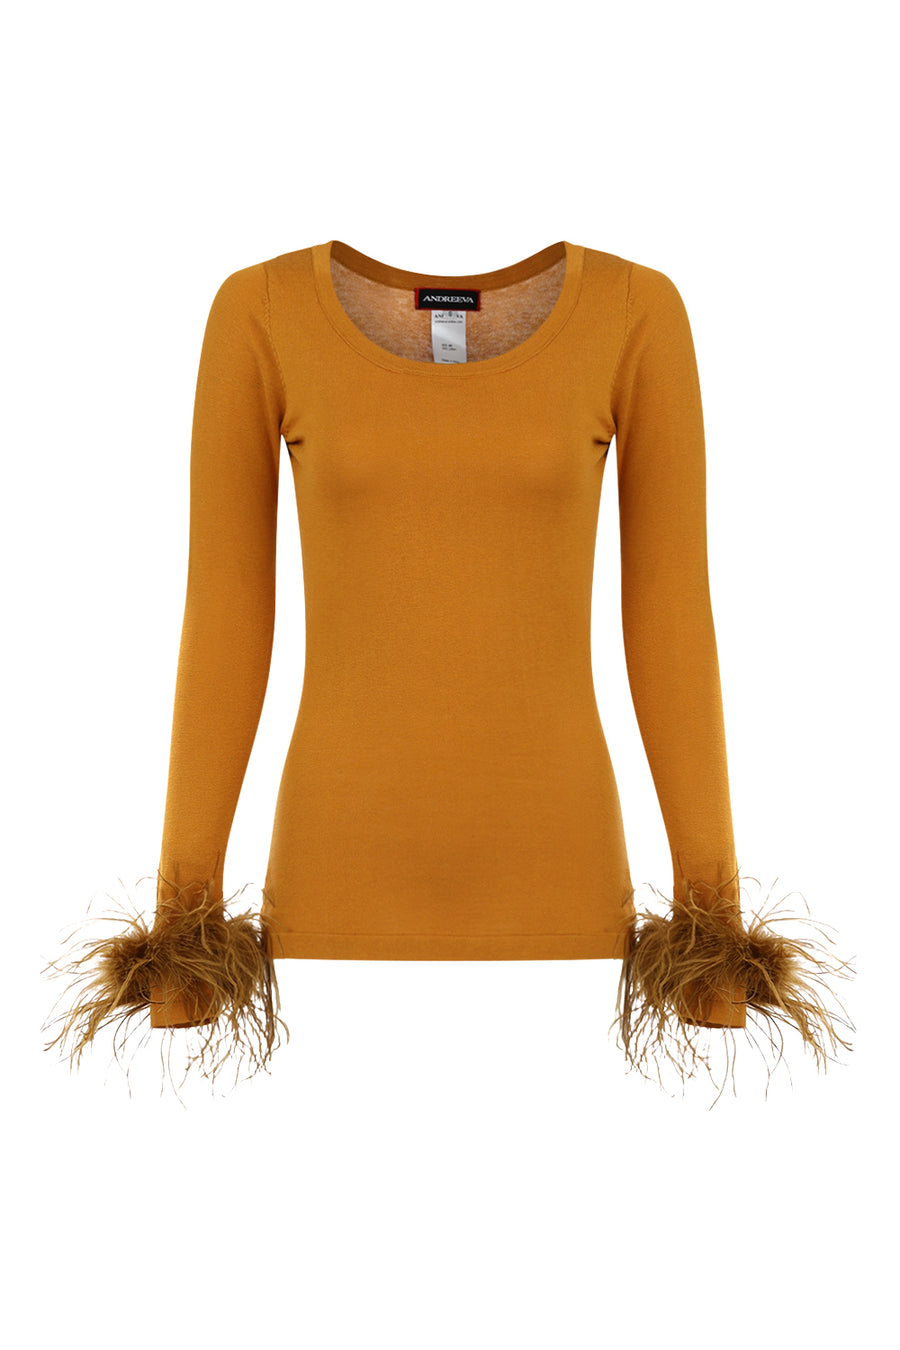 camel knit top with feathers